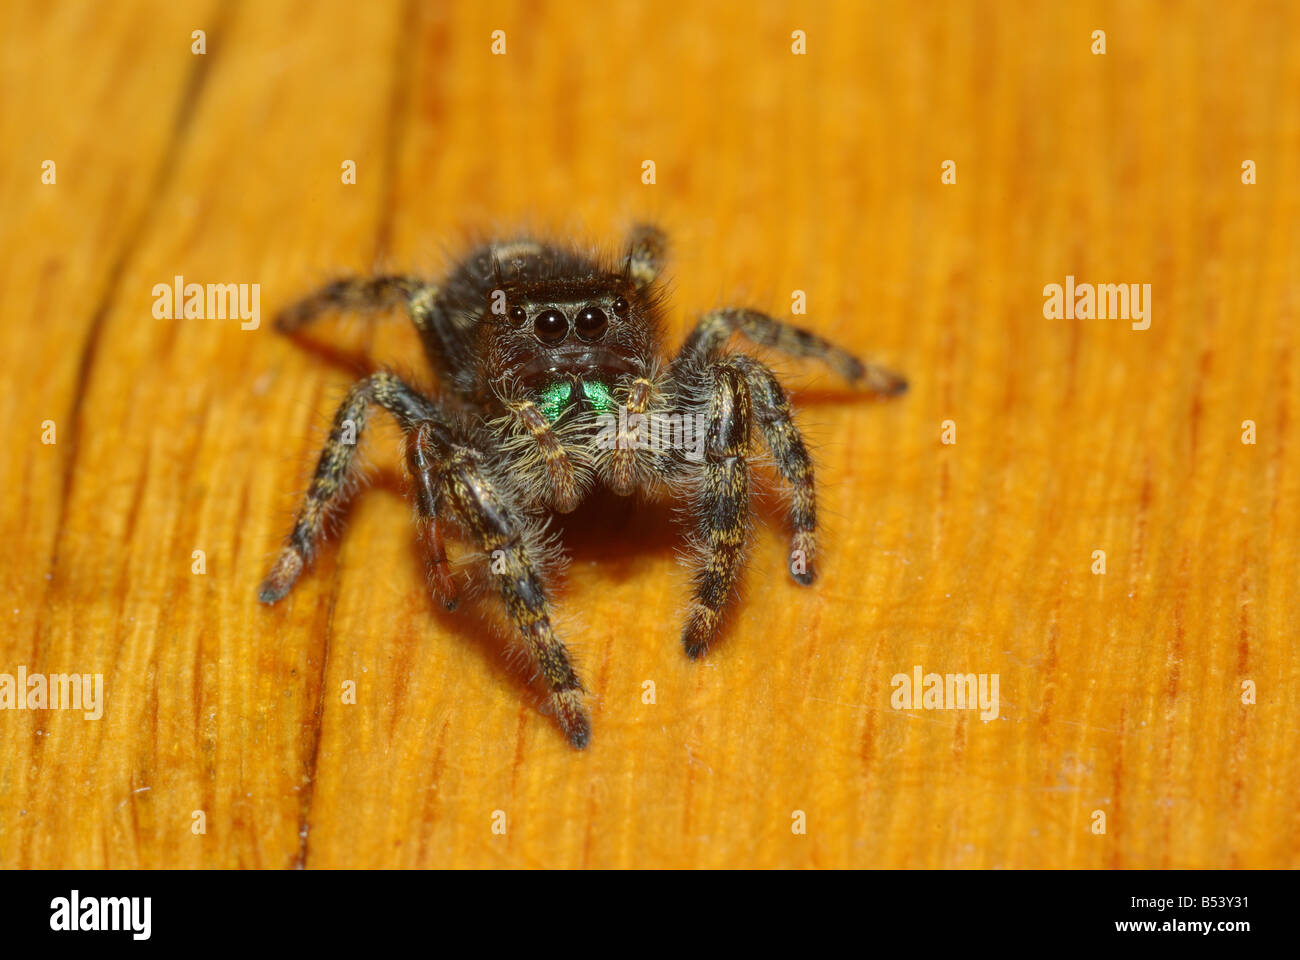 A jumping spider on the prowl Stock Photo